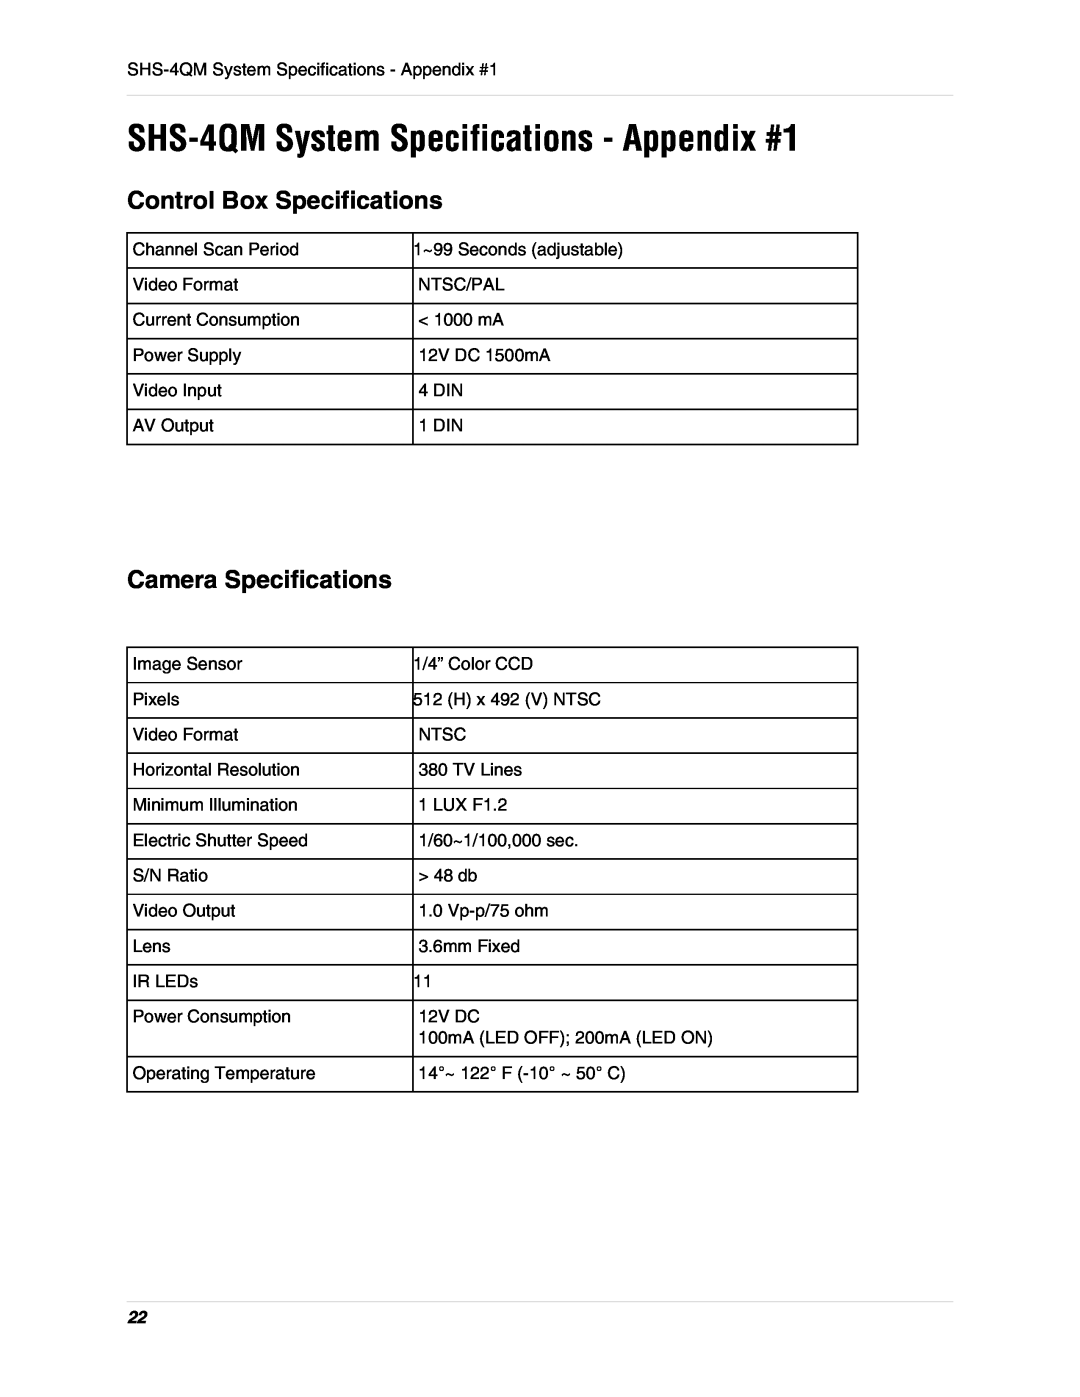 LOREX Technology SHS-4QM System Specifications - Appendix #1, Control Box Specifications, Camera Specifications 